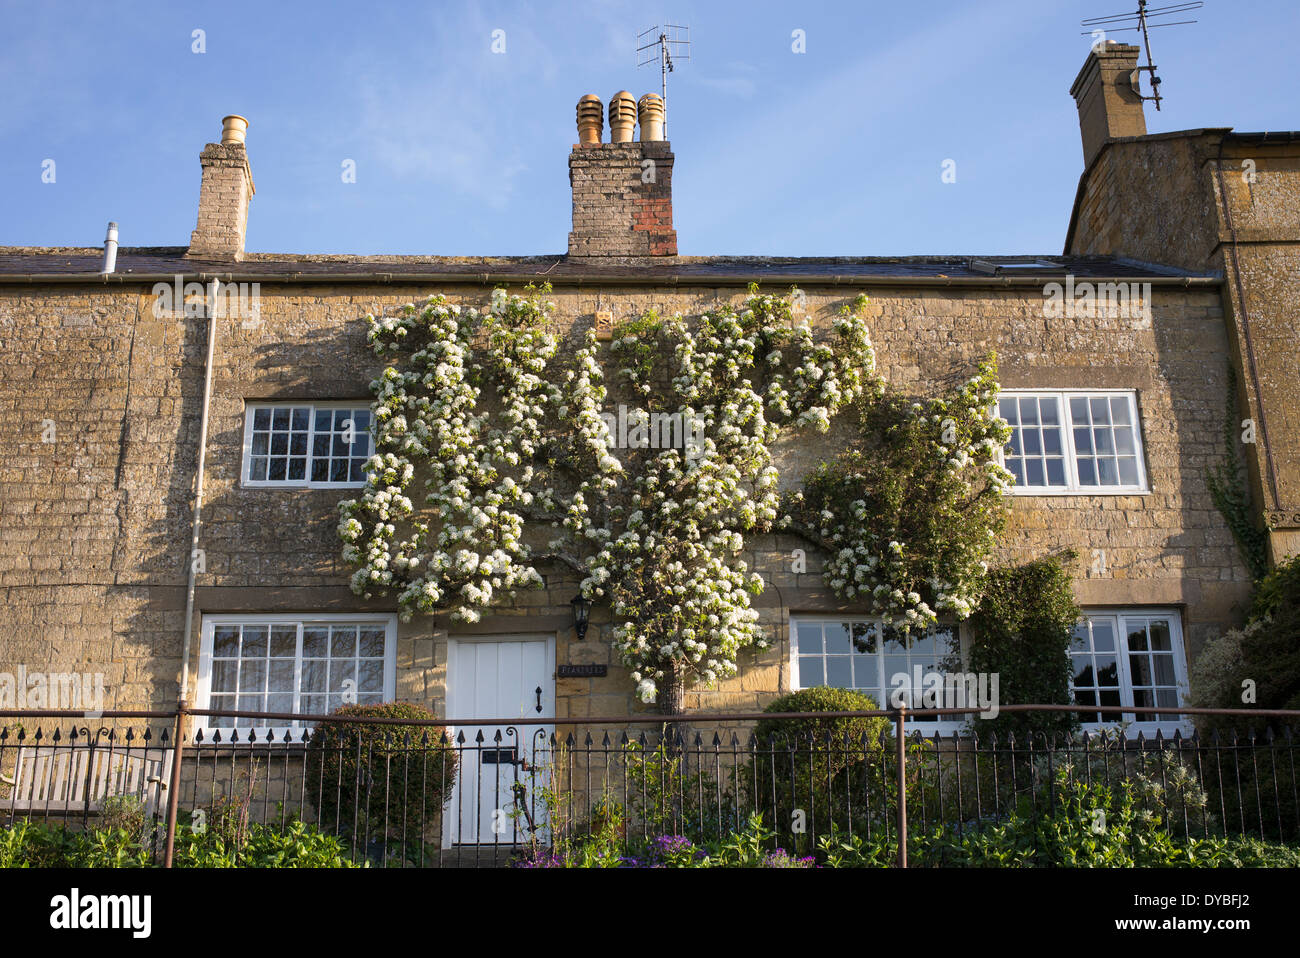 Fan trained Pear tree in blossom on a cottage in the village of Blockley, Cotswolds, Gloucestershire, England Stock Photo